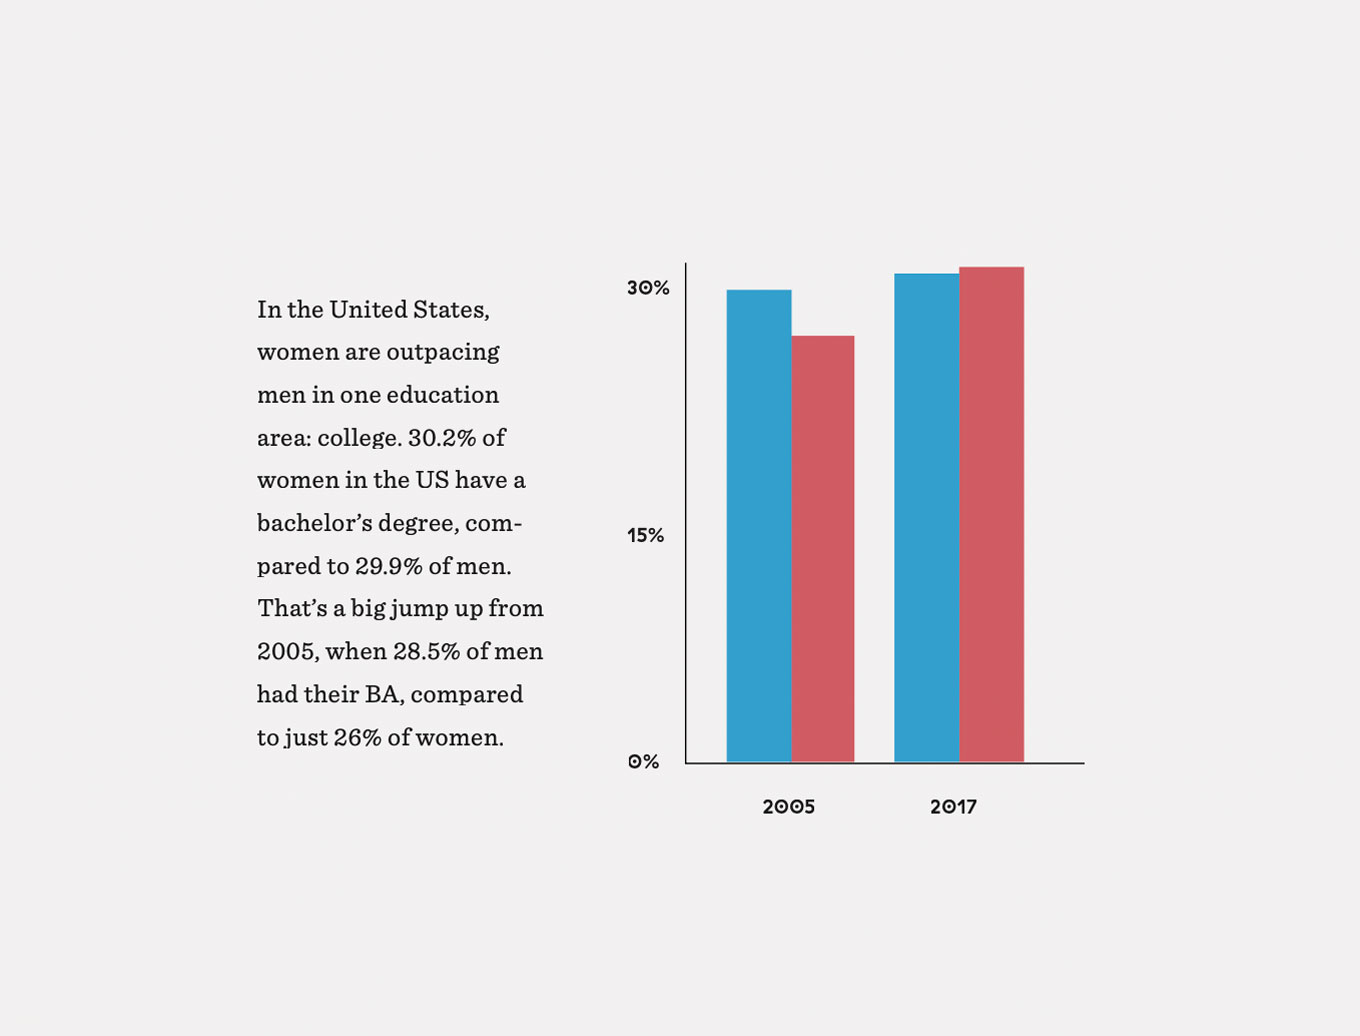 In the United States, women are outpacing men in one education area: college. 30.2% of women in the US have a bachelor’s degree, com- pared to 29.9% of men. That’s a big jump up from 2005, when 28.5% of men had their BA, compared to just 26% of women.